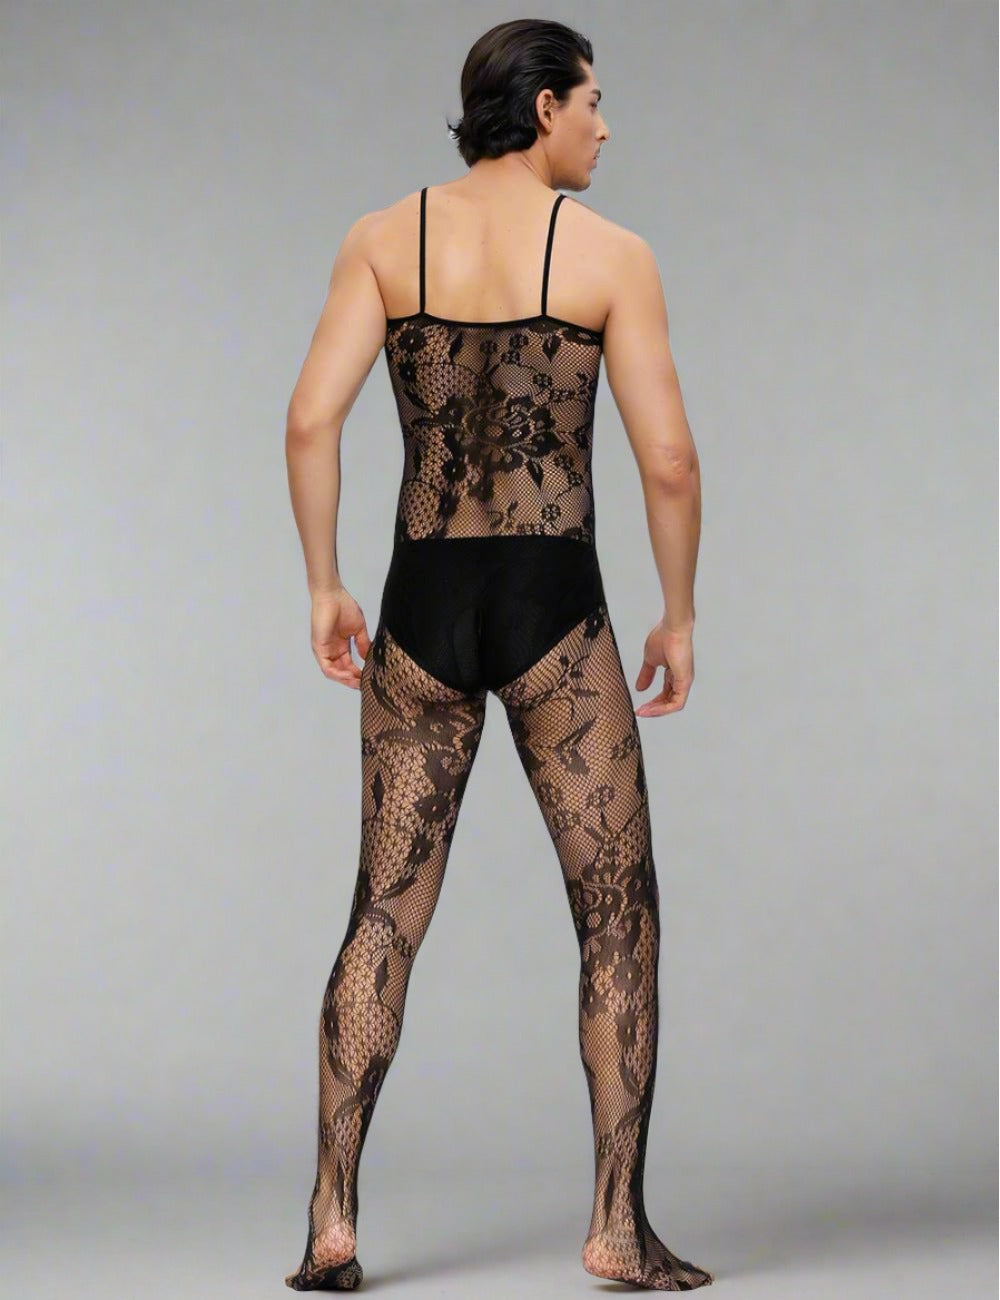 Floral Spaghetti Strap Bodystocking - Seductive Fishnet & Floral Pattern by Scandals